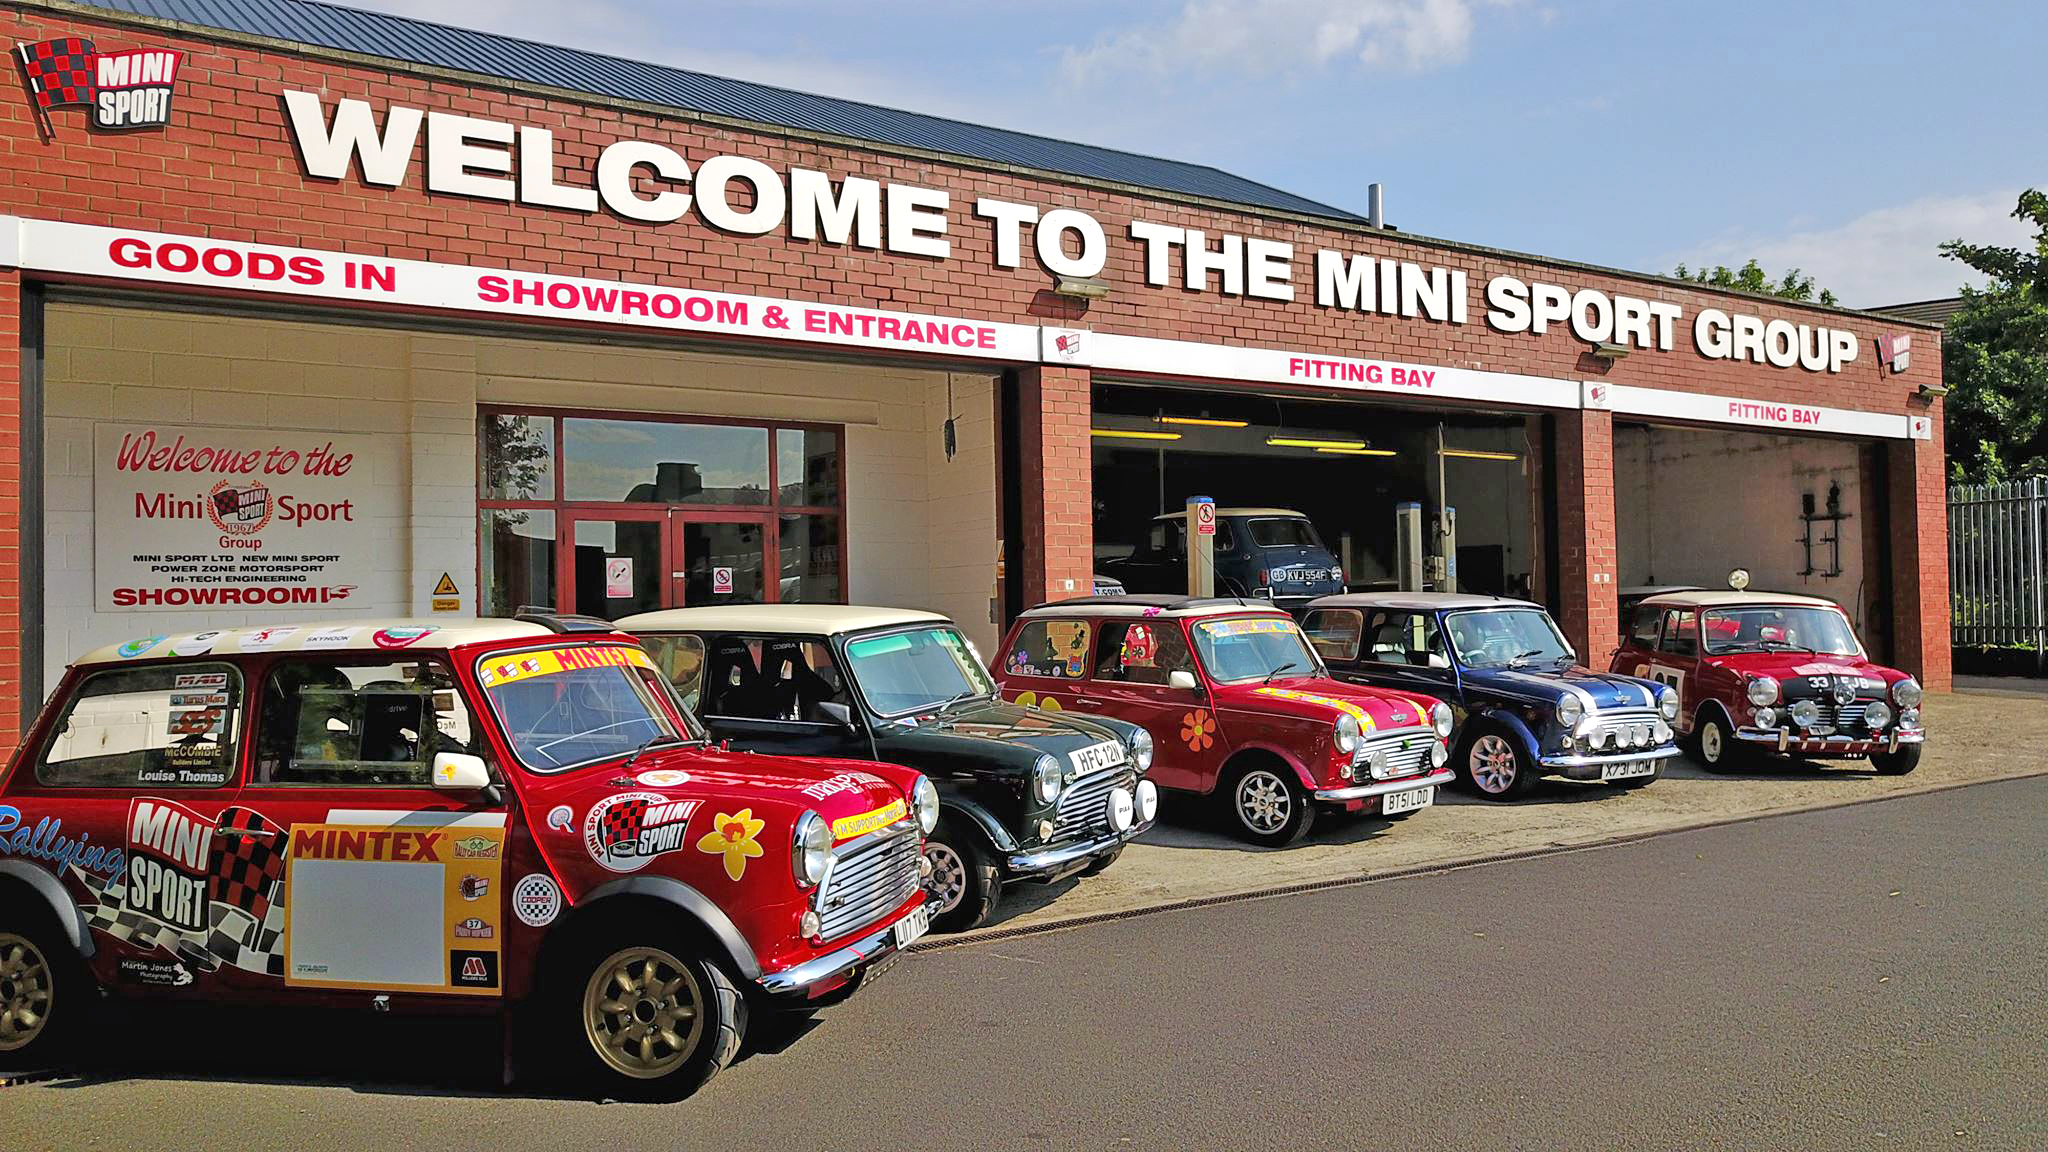 From A Lancashire Garage To The World: The Mini Sport Story